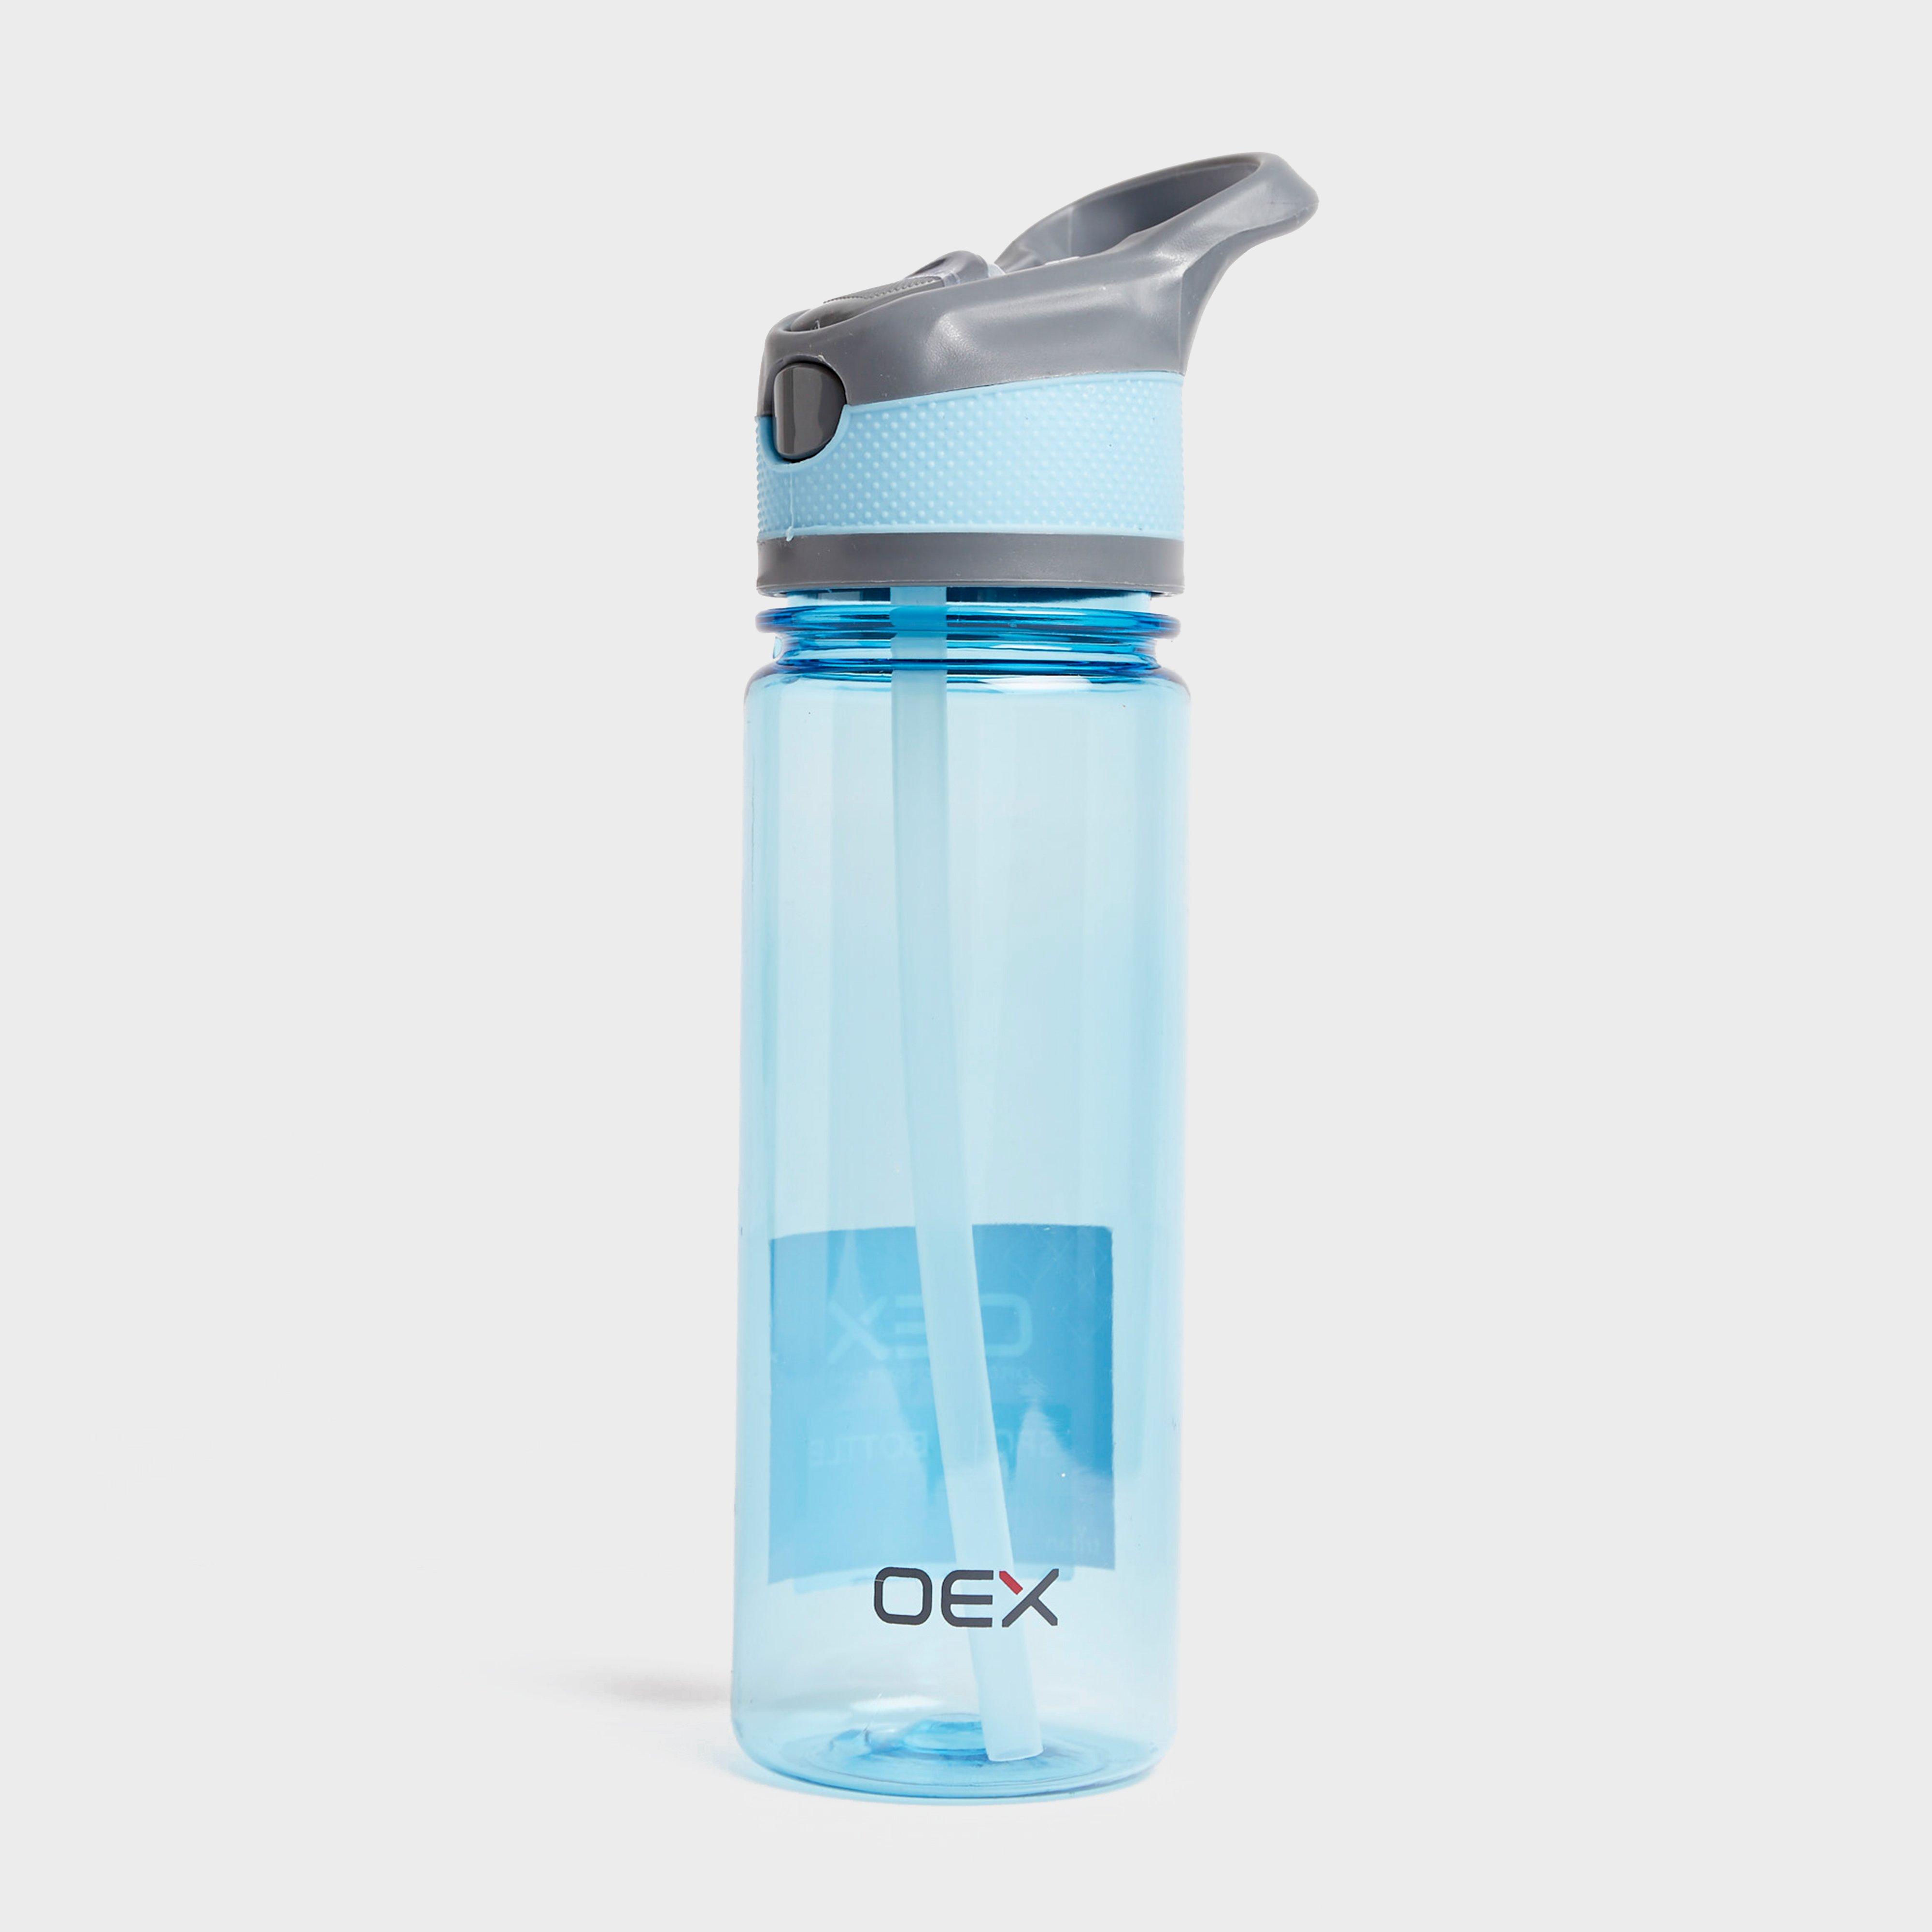 Image of Oex Spout Water Bottle (700Ml) - Blue/Lbl, Blue/LBL